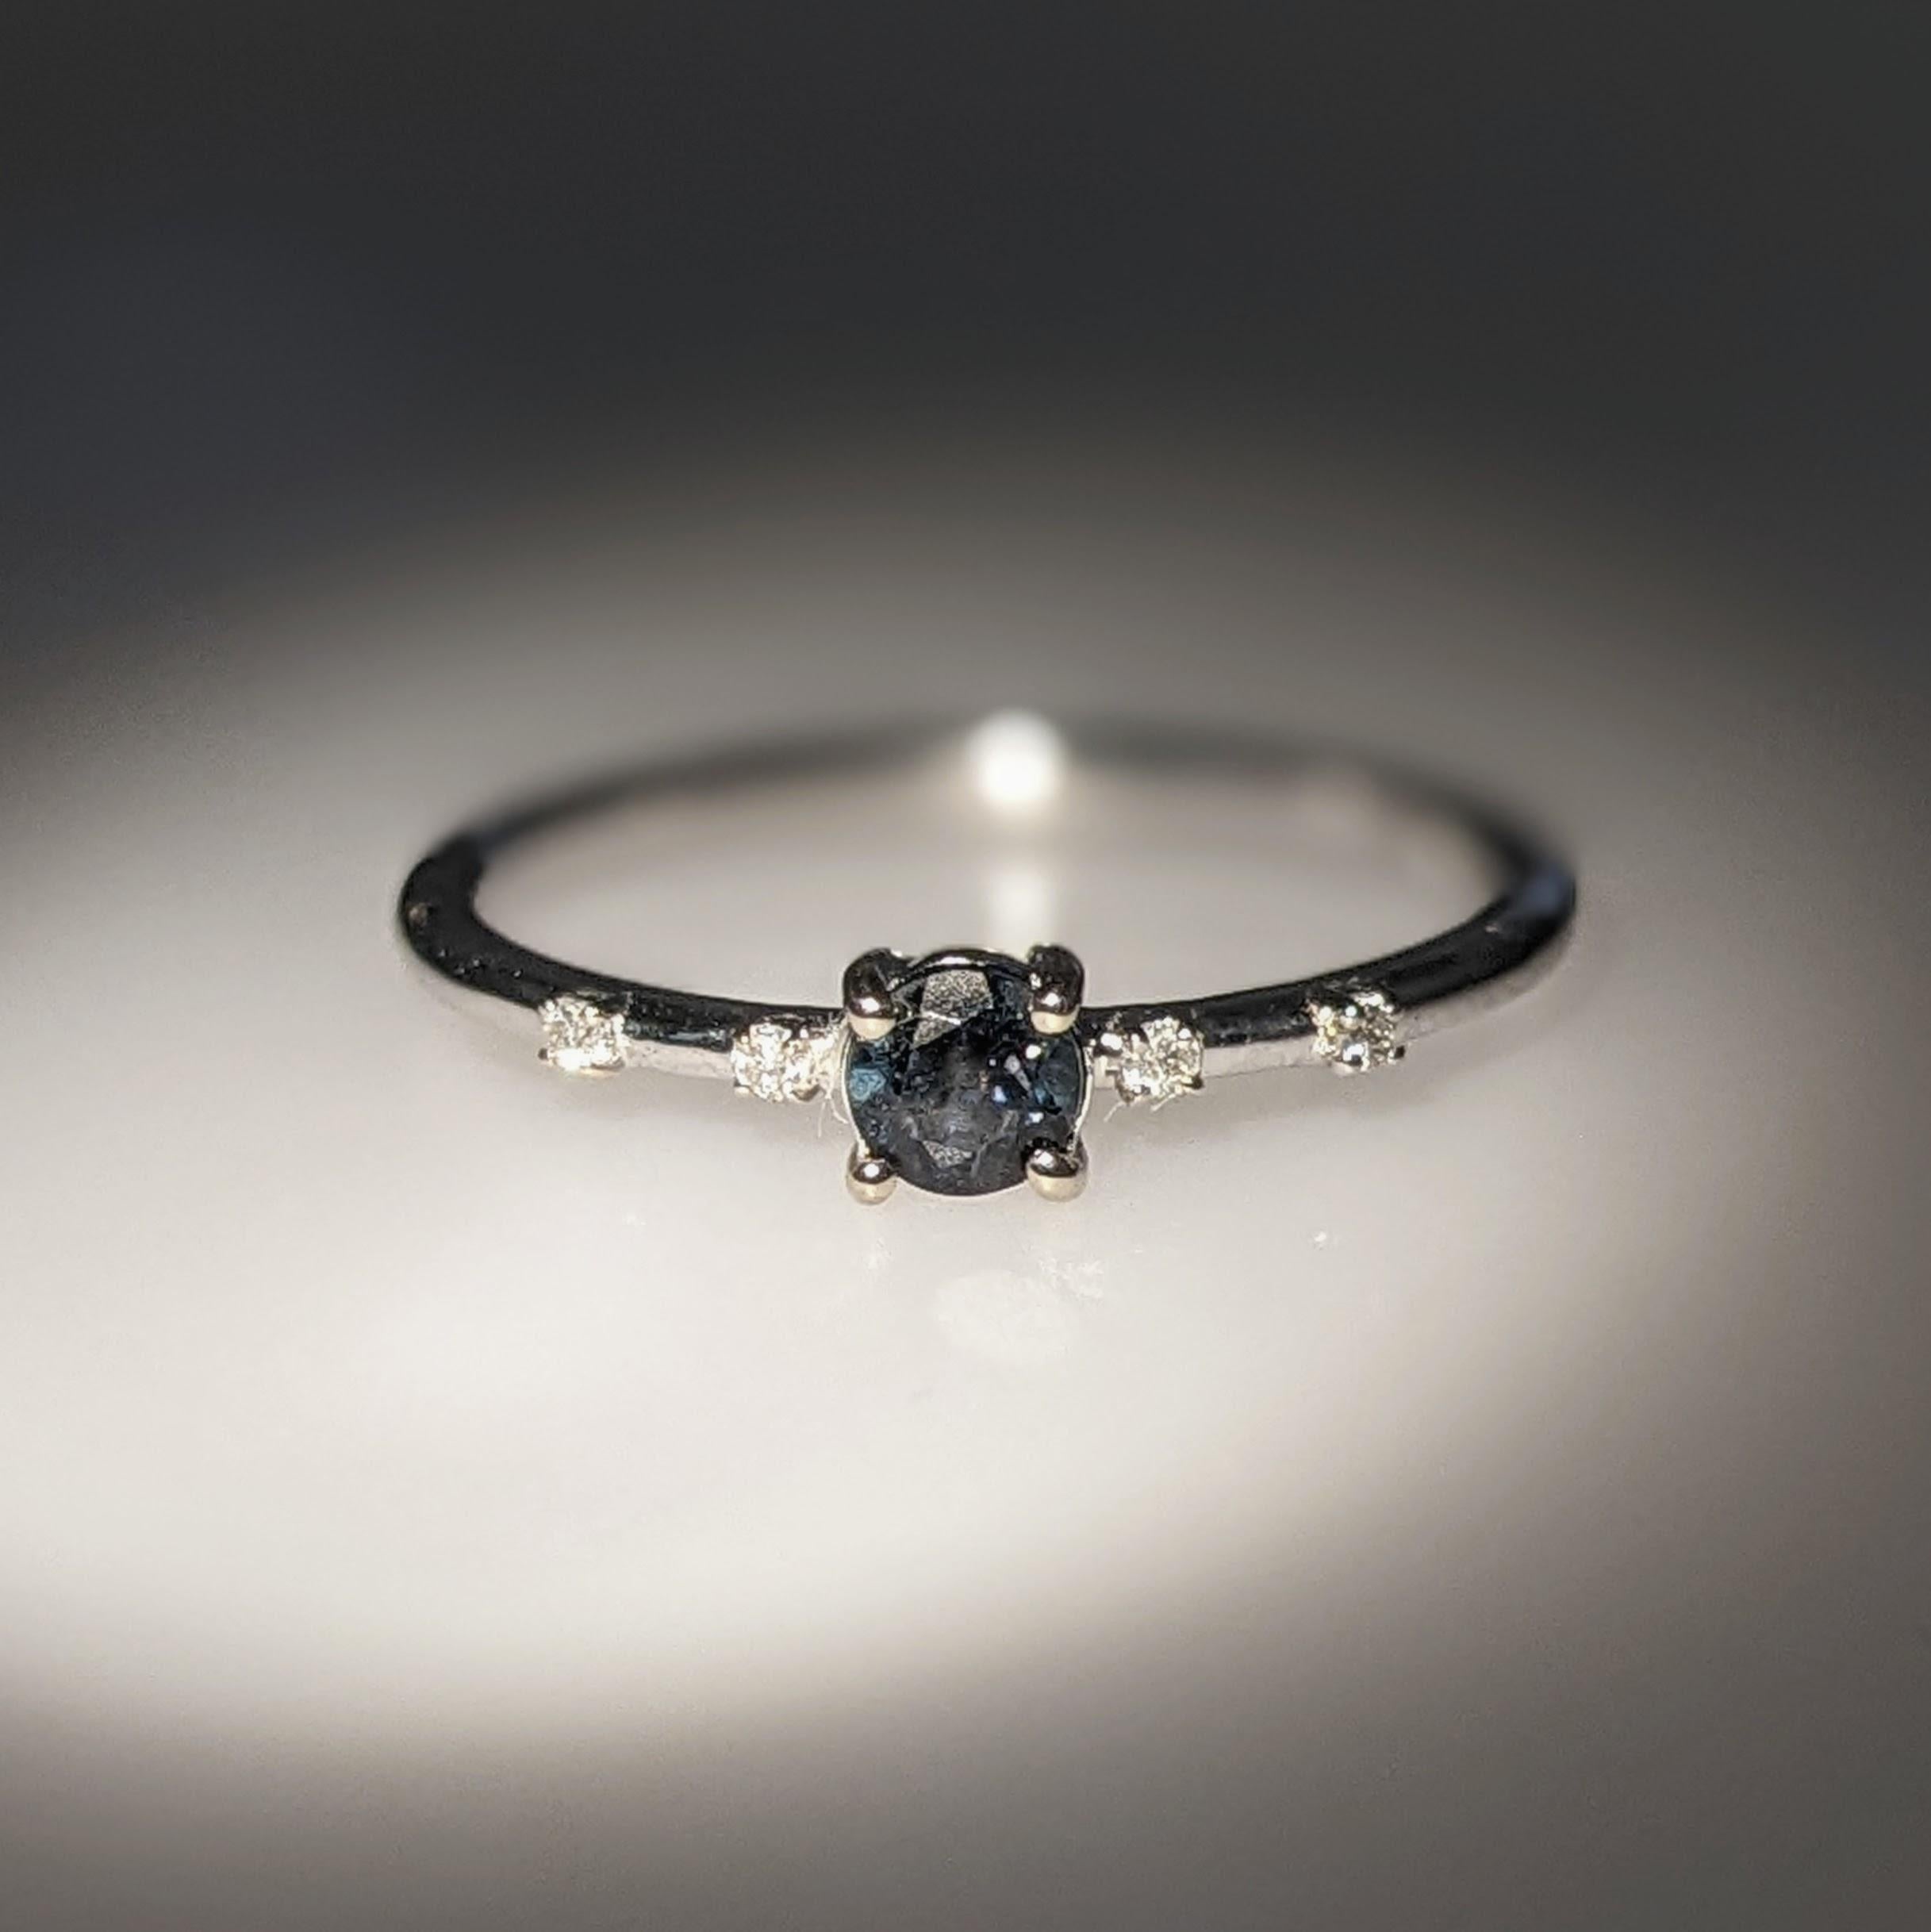 This beautiful ring features an alexandrite in 14k white Gold and four diamond accents. A dainty ring design perfect for an eye catching engagement or anniversary. This ring also makes a beautiful birthstone ring for your loved ones.

The occasions